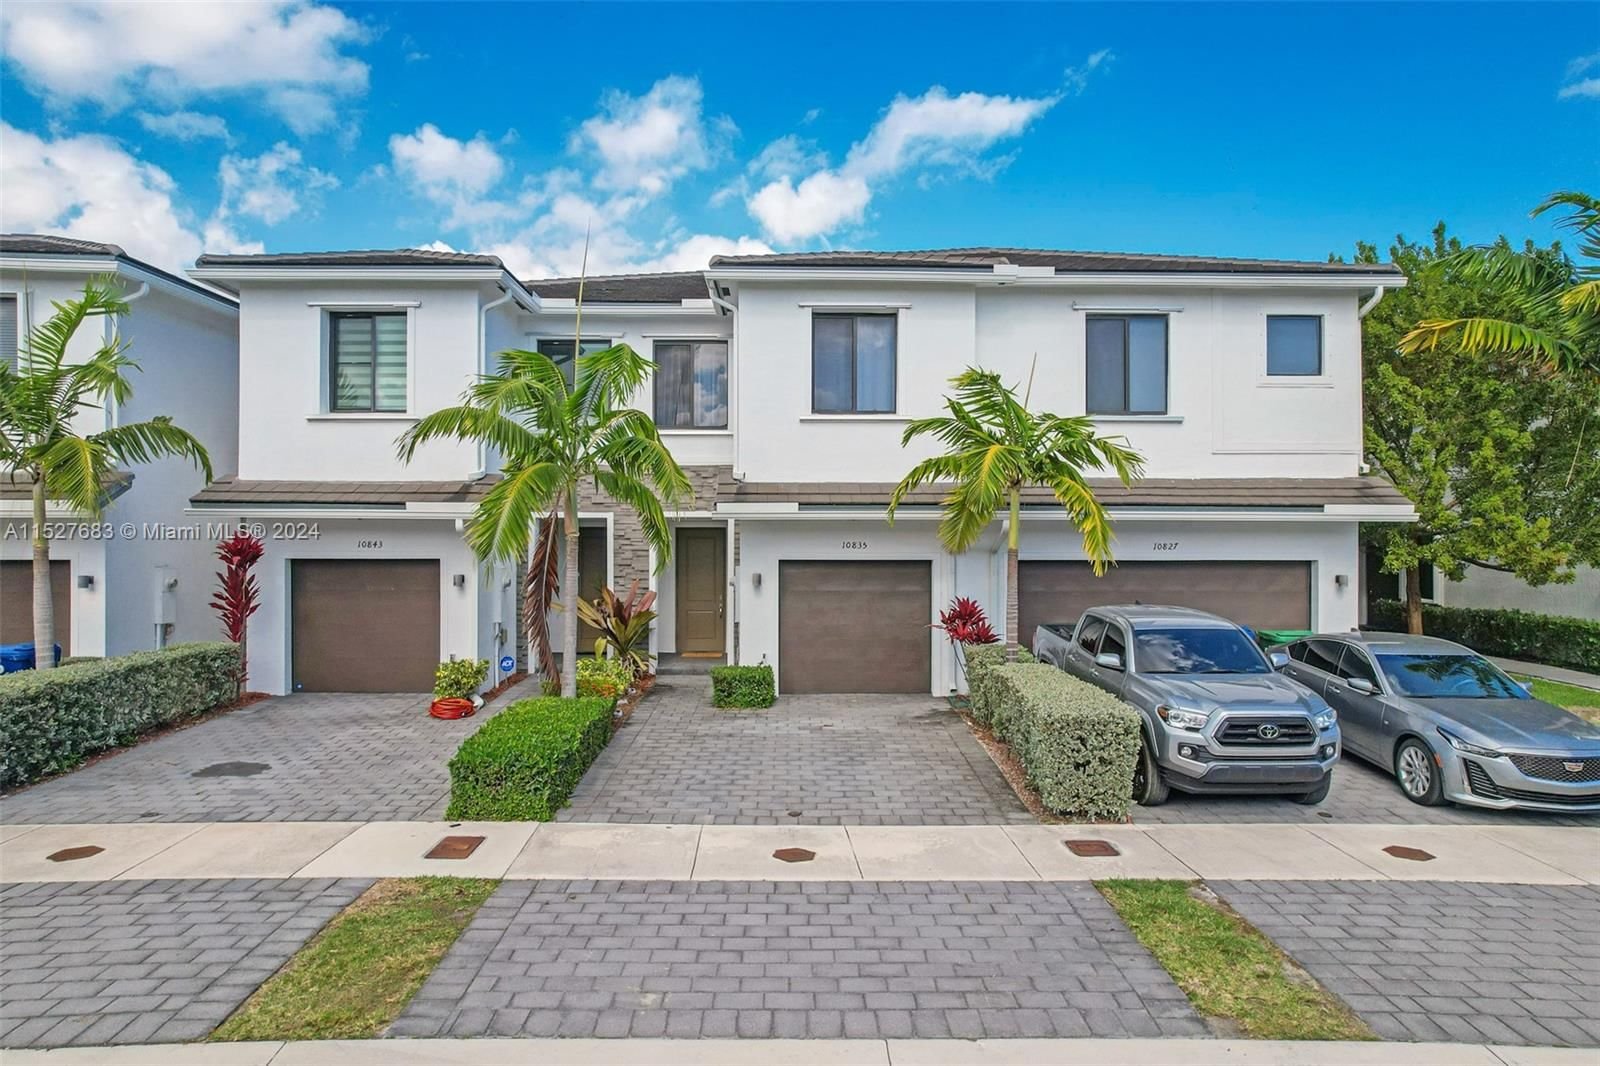 Real estate property located at 10835 235th Ln, Miami-Dade County, MC RESIDENTIAL, Homestead, FL